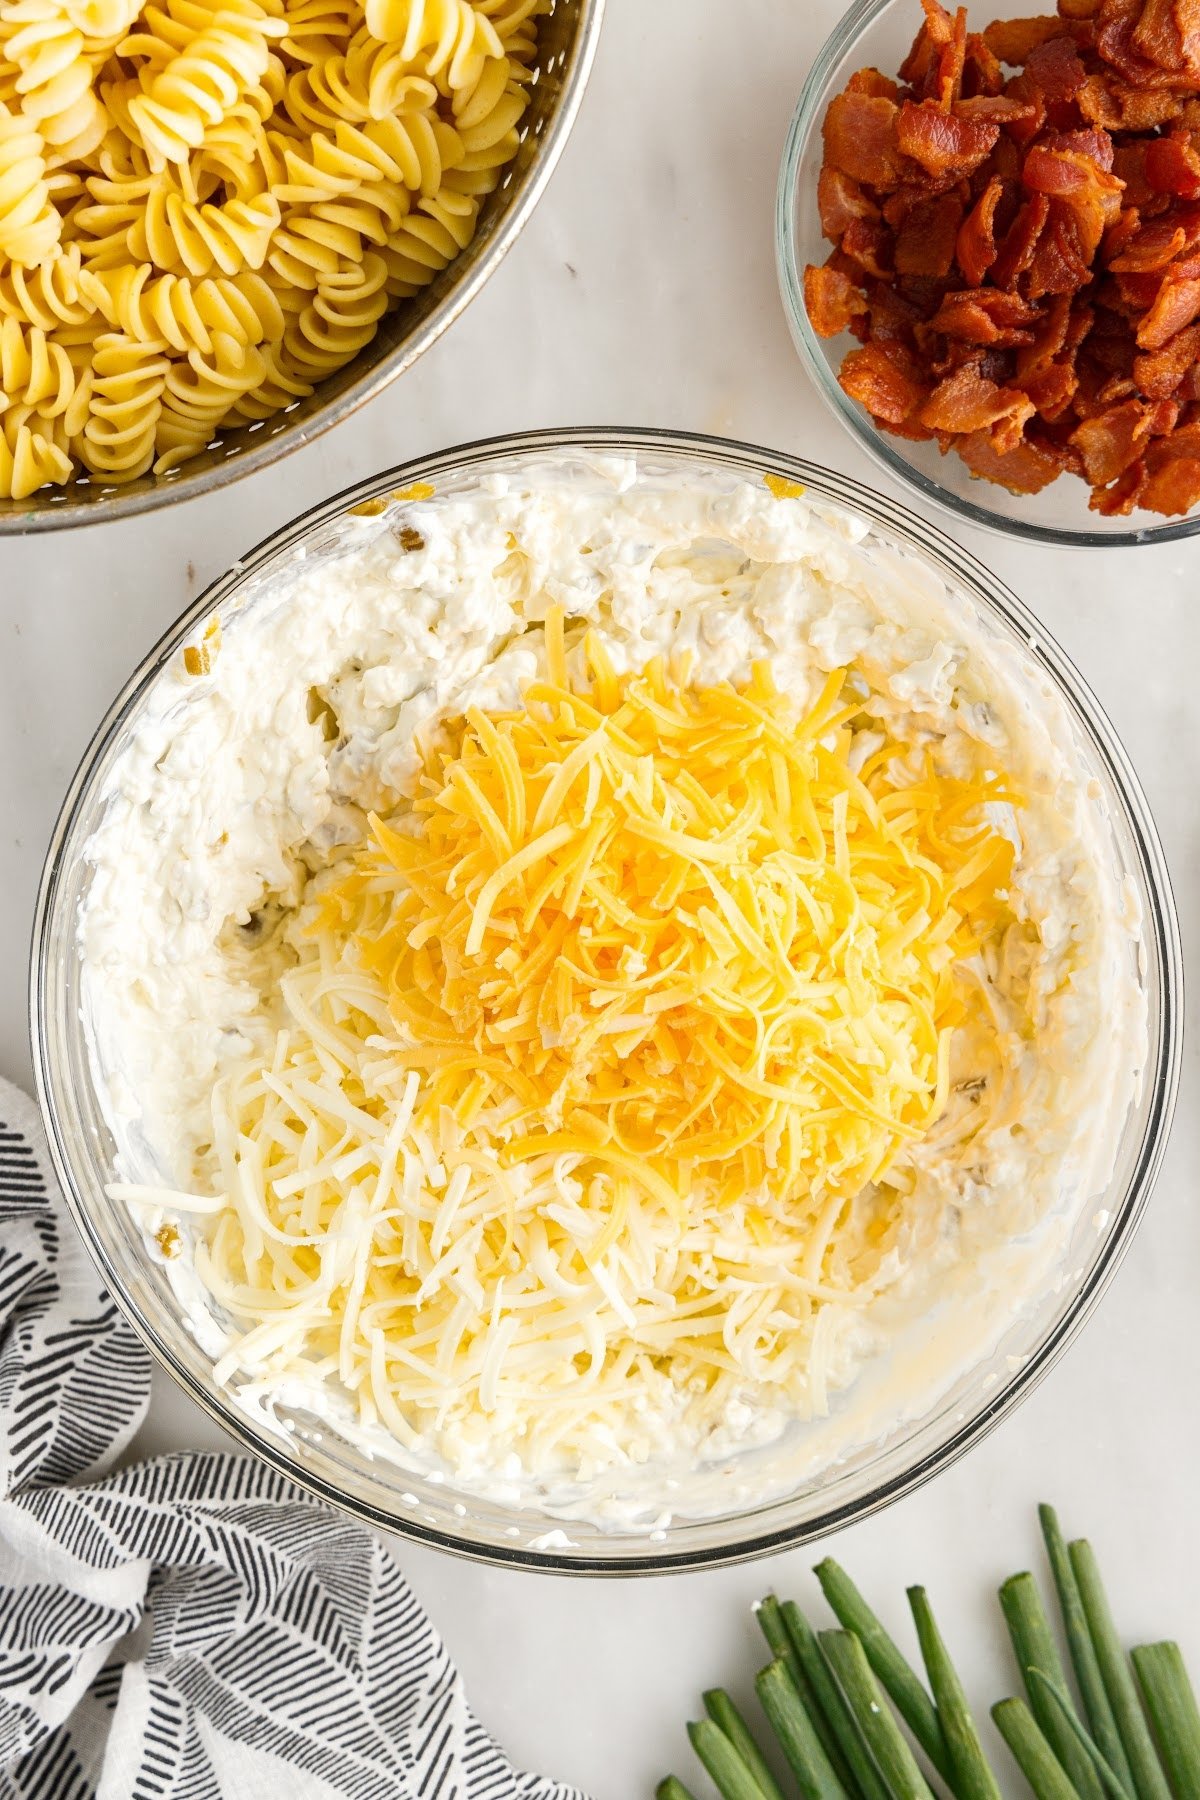 Grated cheeses being mixed into the cream cheese mixture.